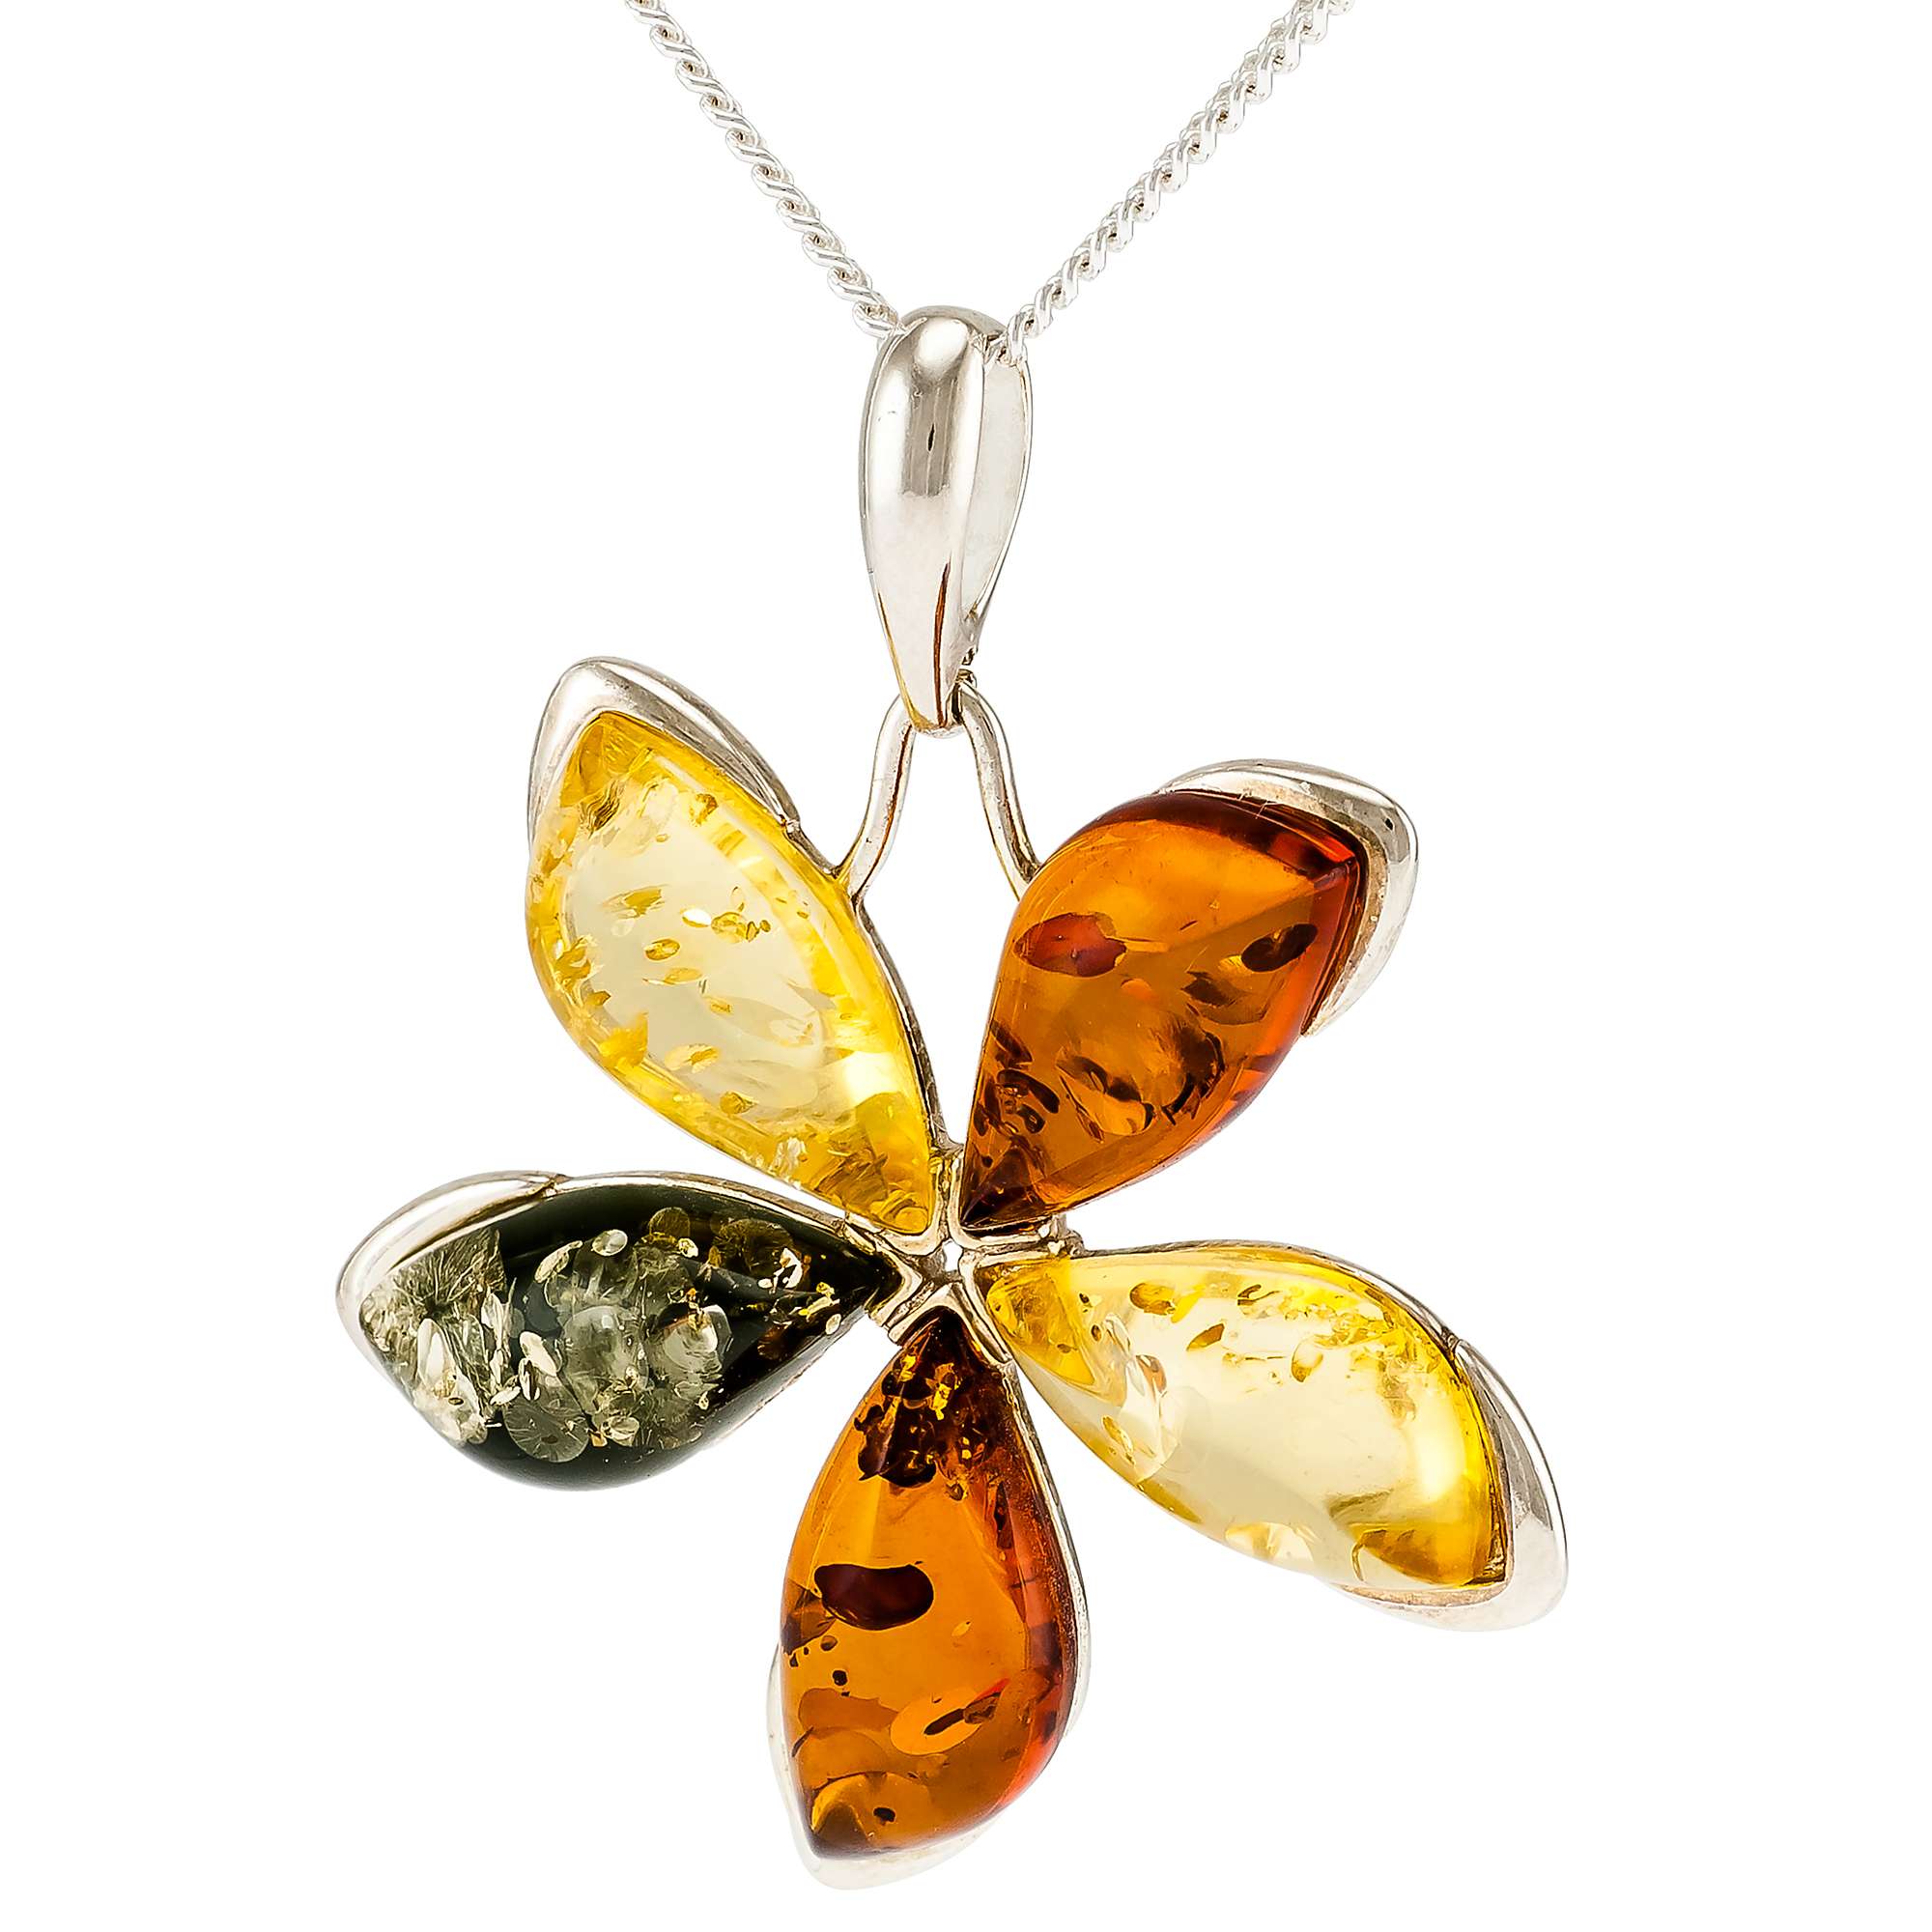 Buy Be-Jewelled Sterling Silver Marquise Amber Flower Pendant Necklace, Multi Online at johnlewis.com